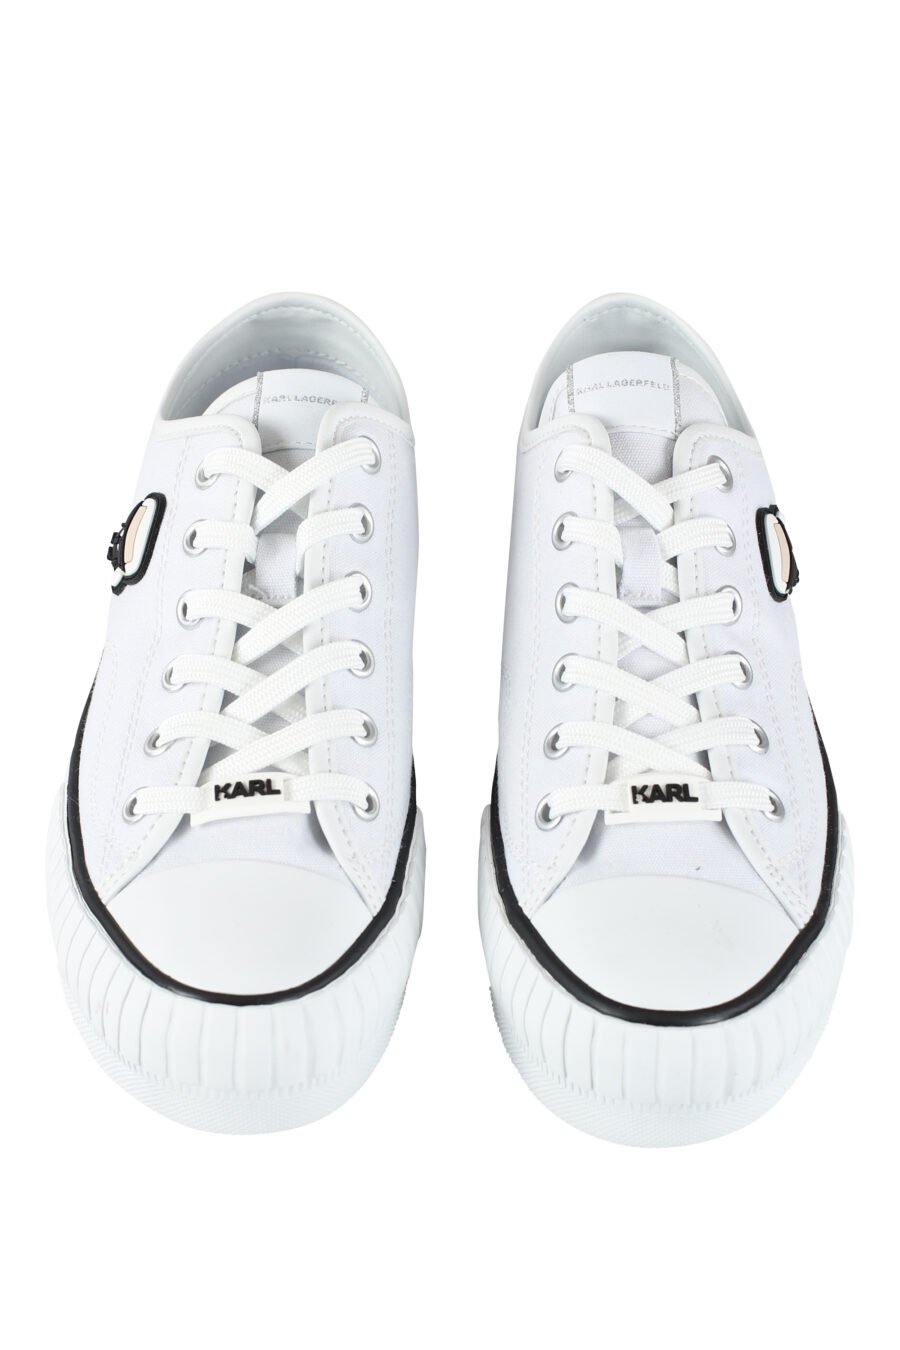 White converse style trainers with rubber "karl" logo - IMG 9620